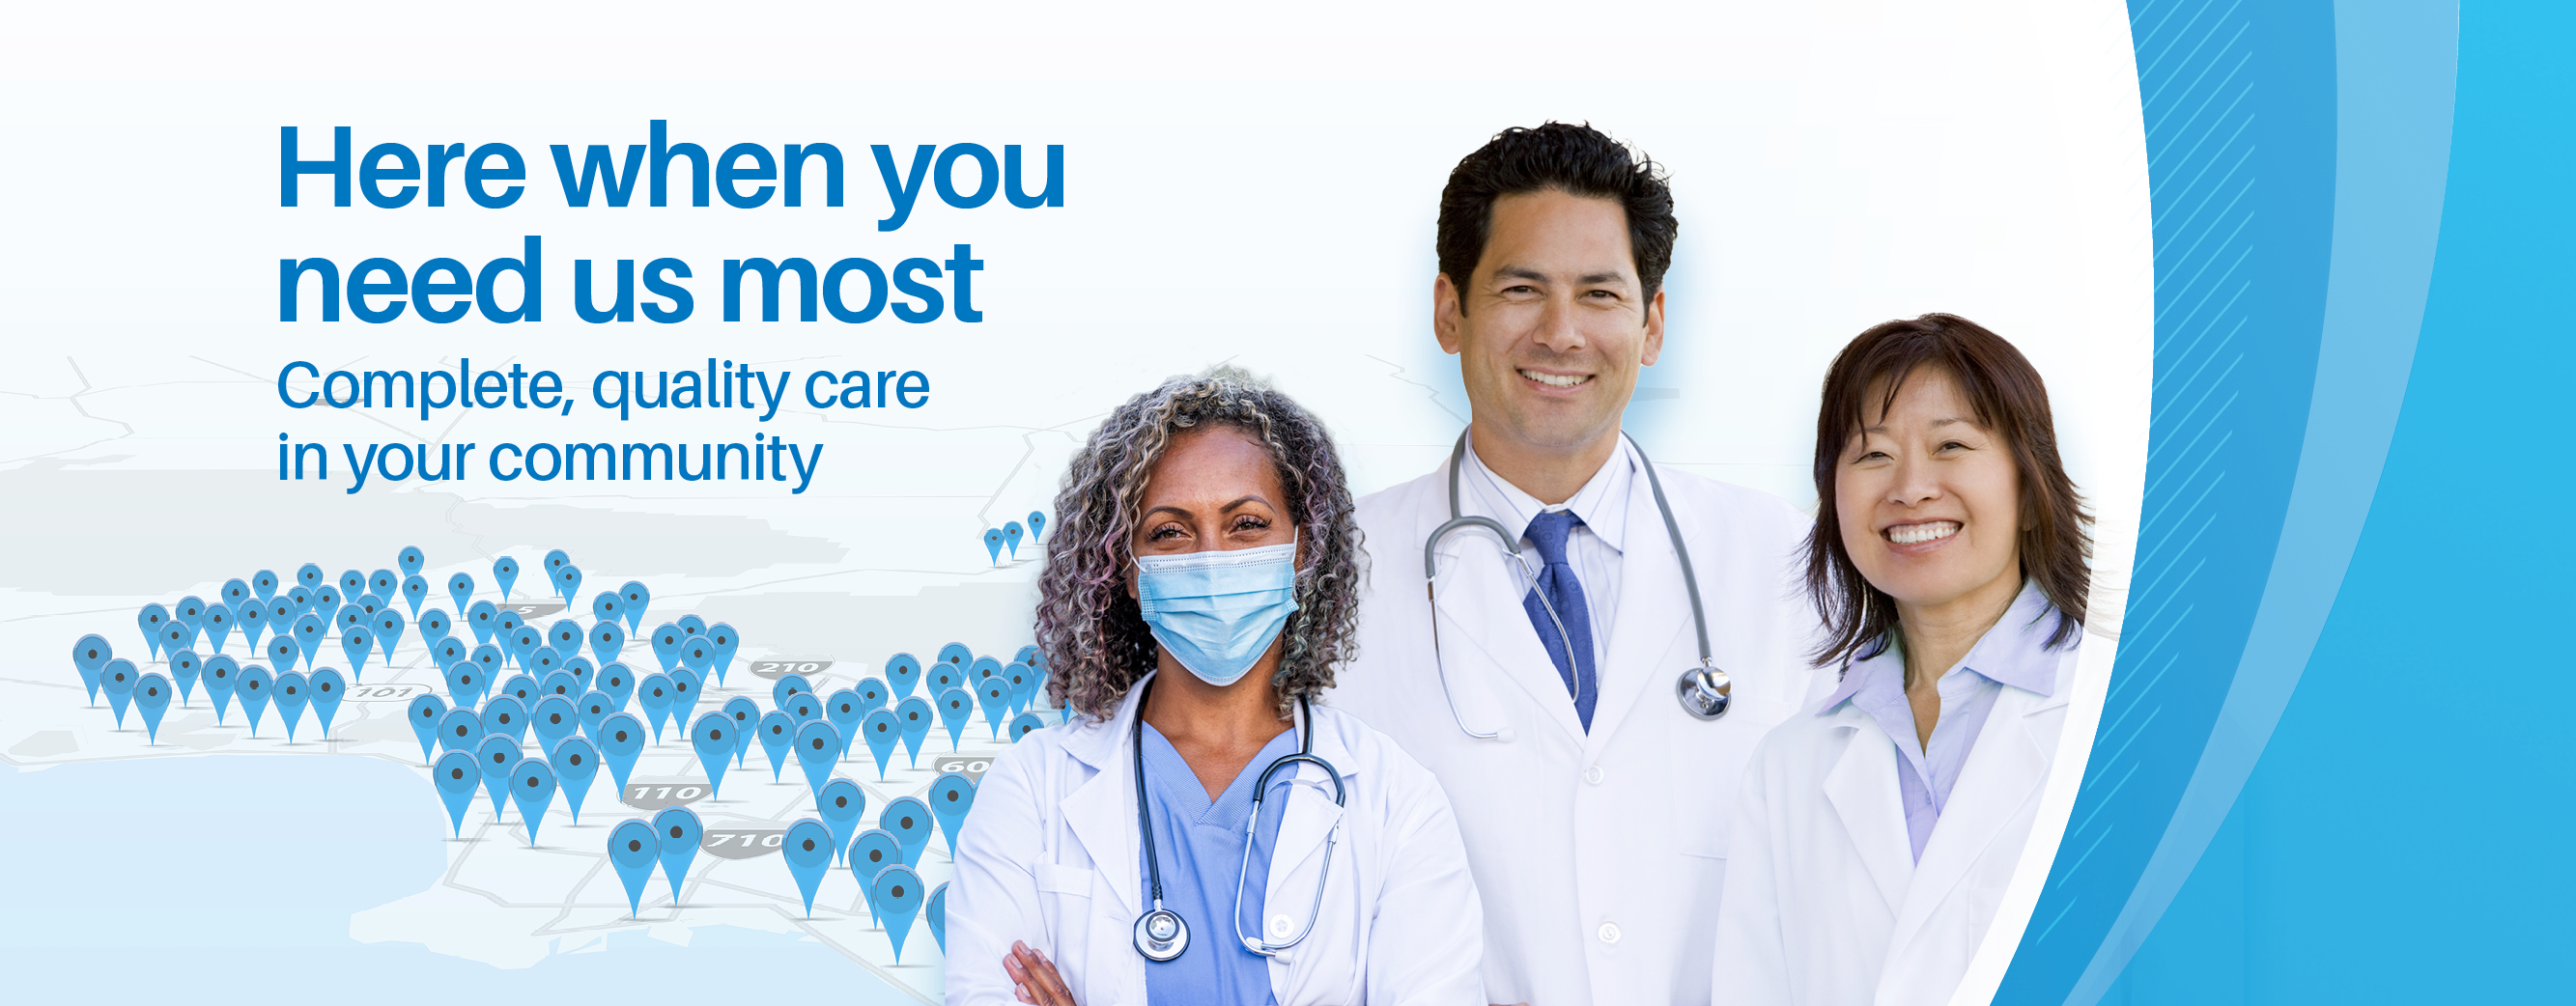 Complete, quality care close to home